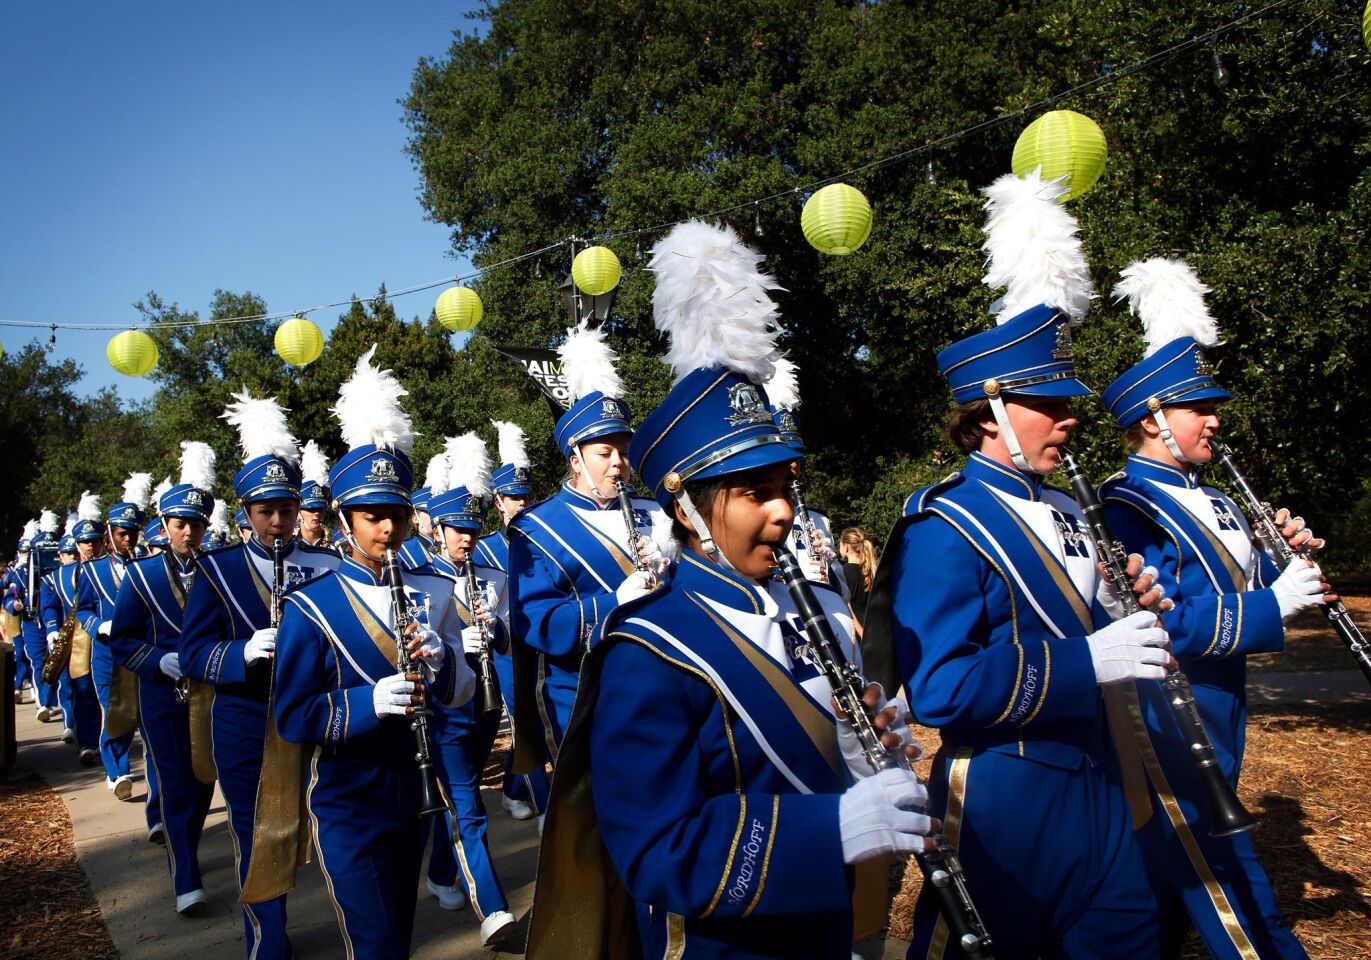 The Nordhoff High School marching band plays on the third day of the festival.